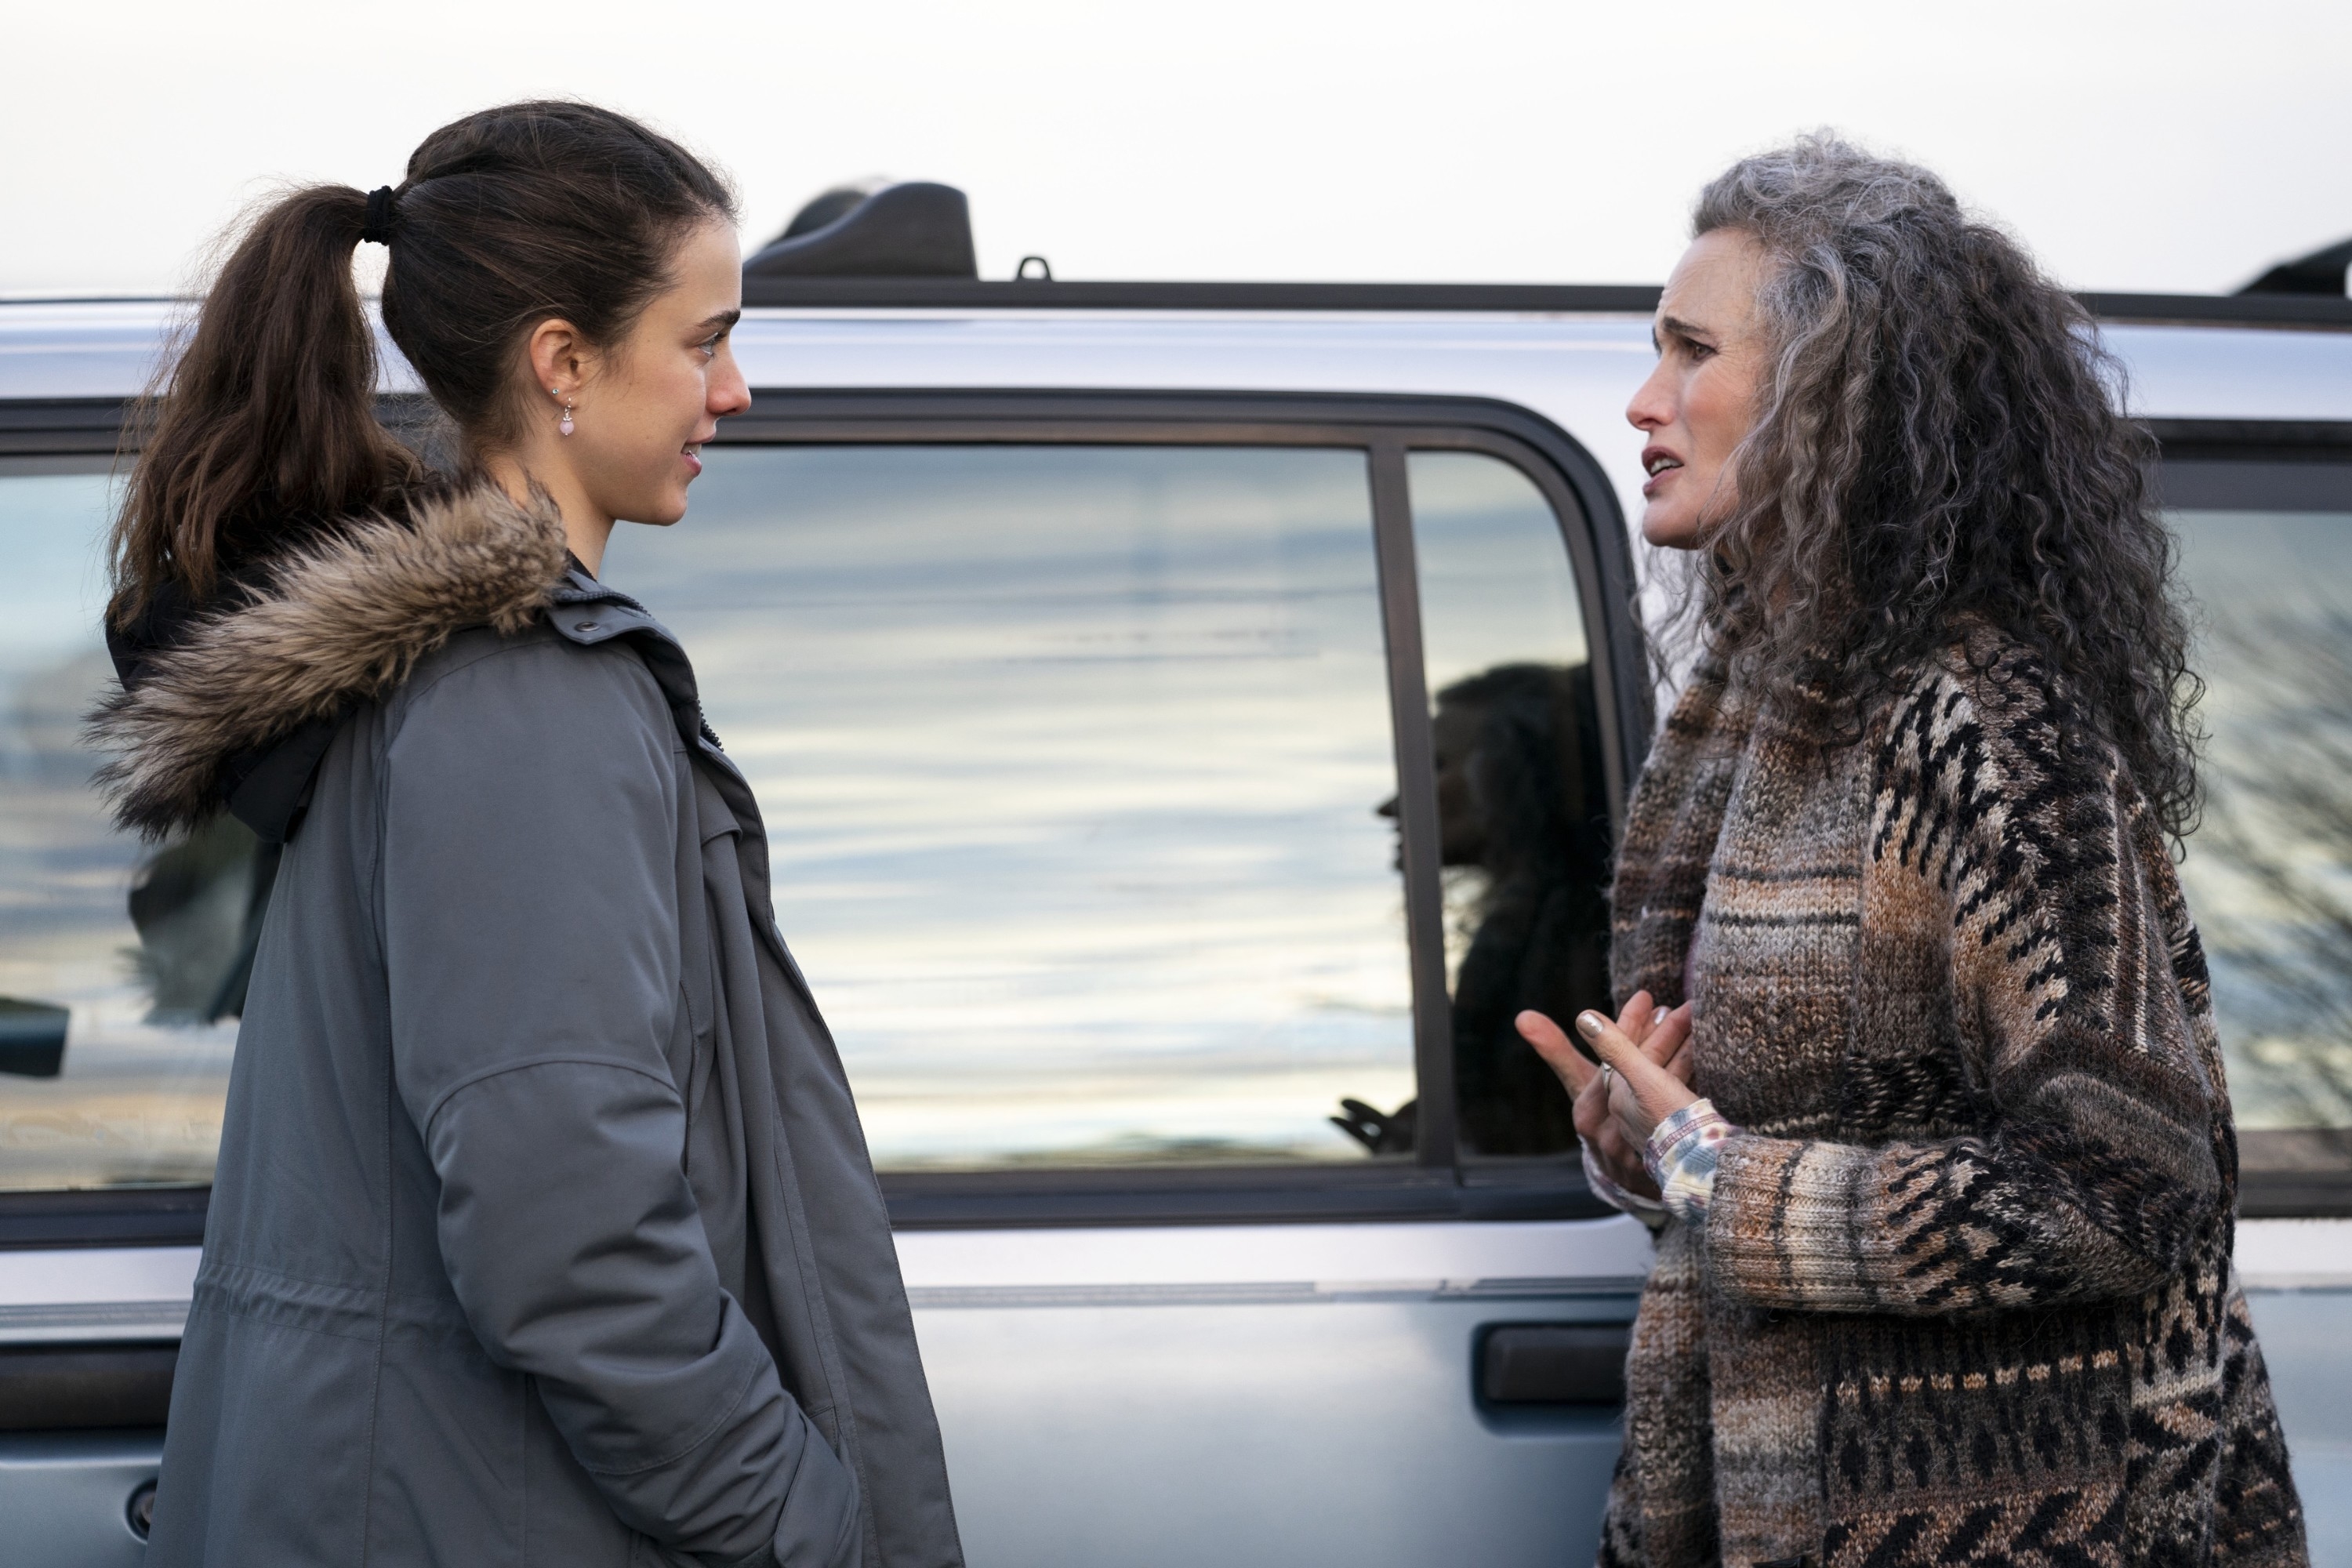 Two actresses on set talking beside a vehicle, dressed in character for a scene